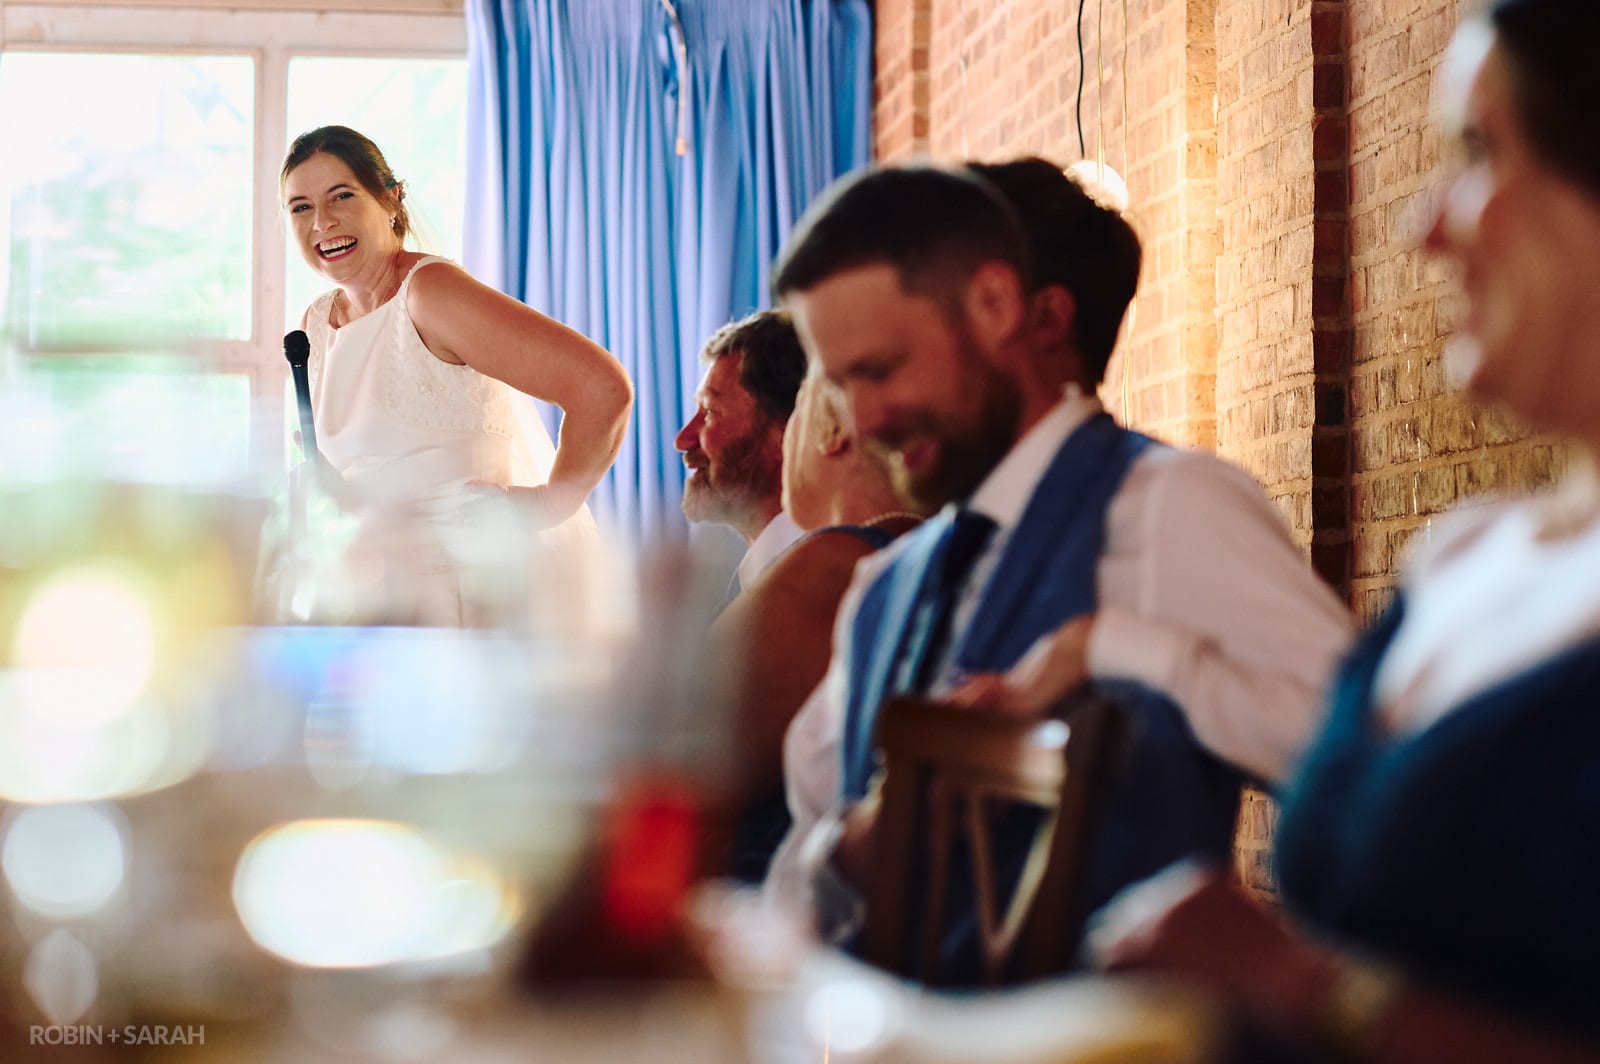 Bride gives wedding speech as groom and guests laugh